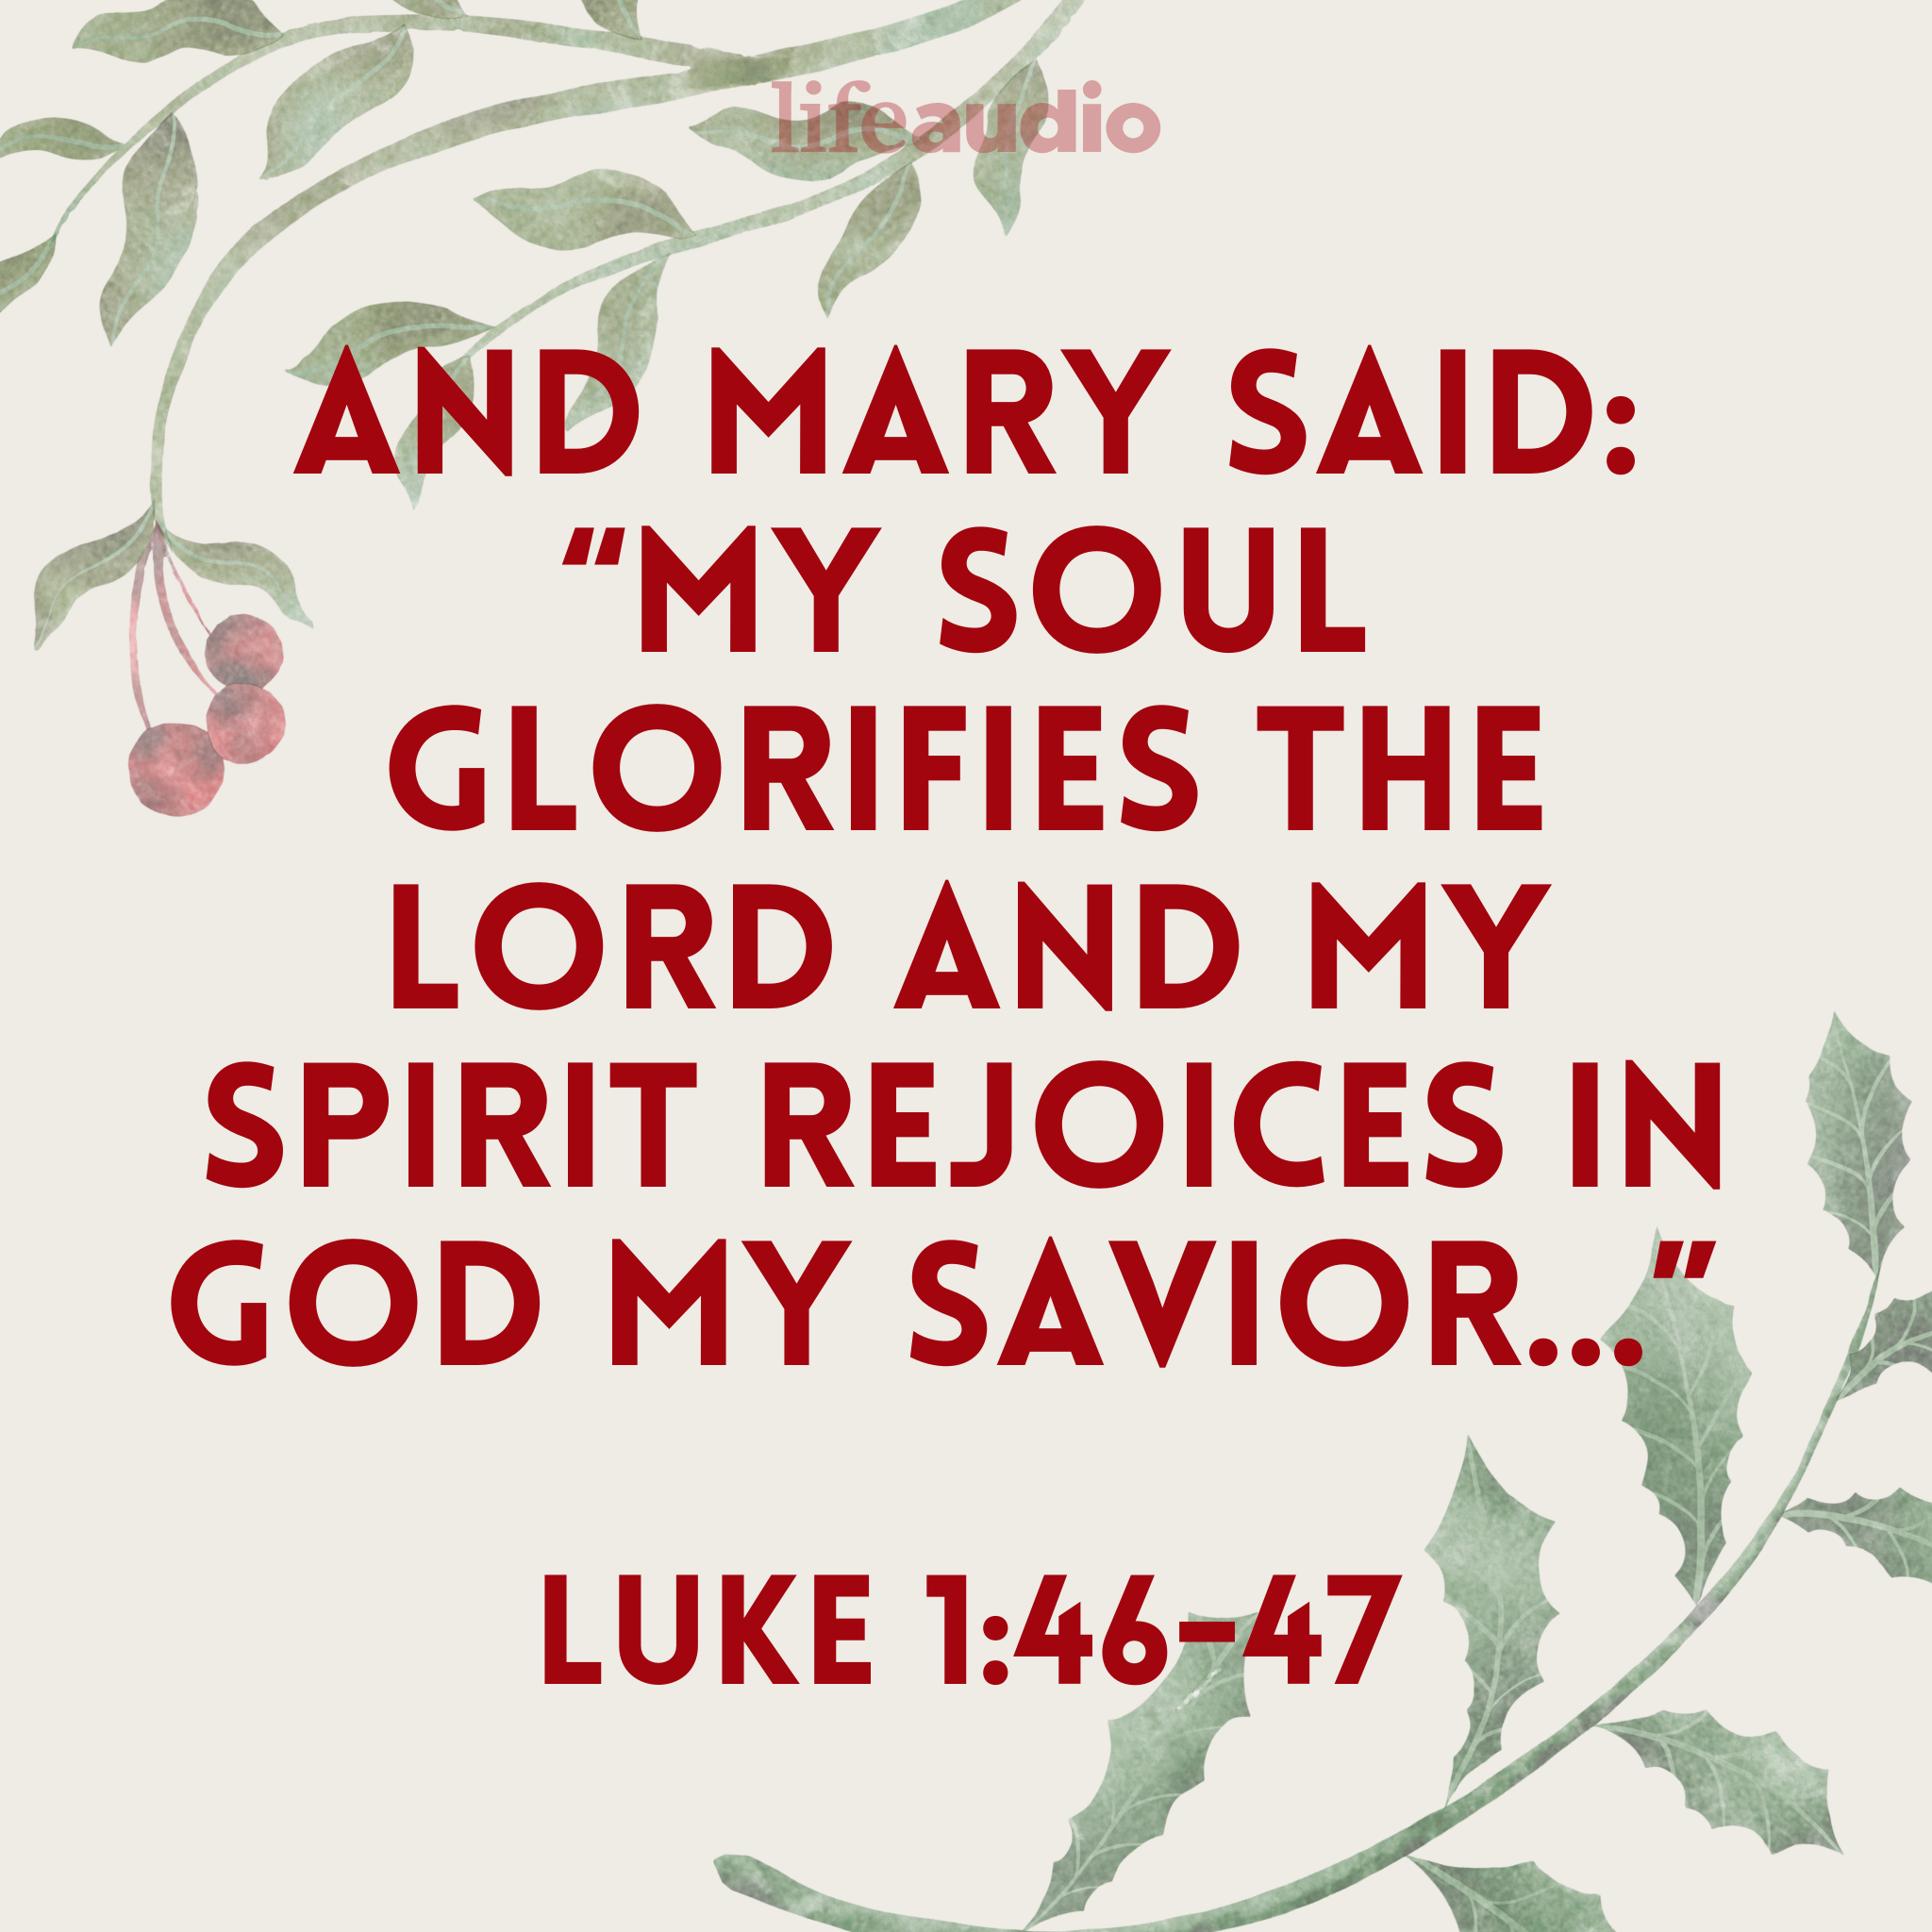 Mary's Song: The Essence of Christmas (Luke 1:46-47)